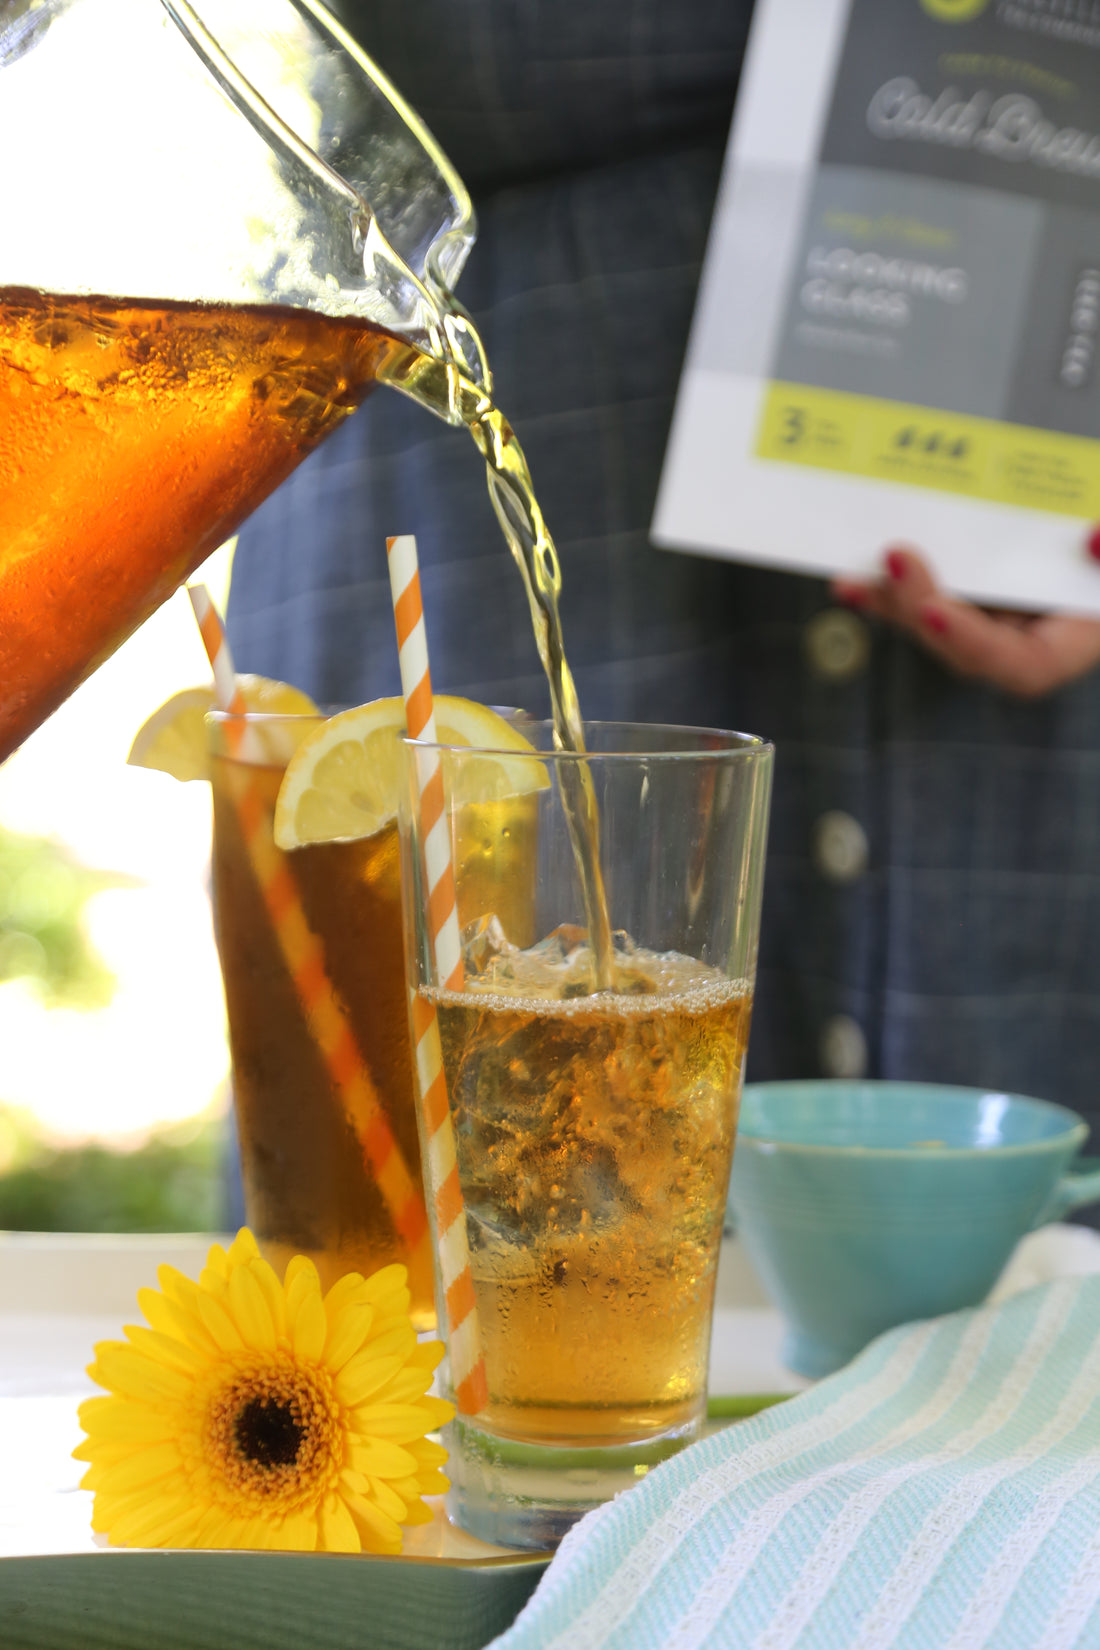 Asheville Tea Cold Brew, Looking Glass Iced Tea